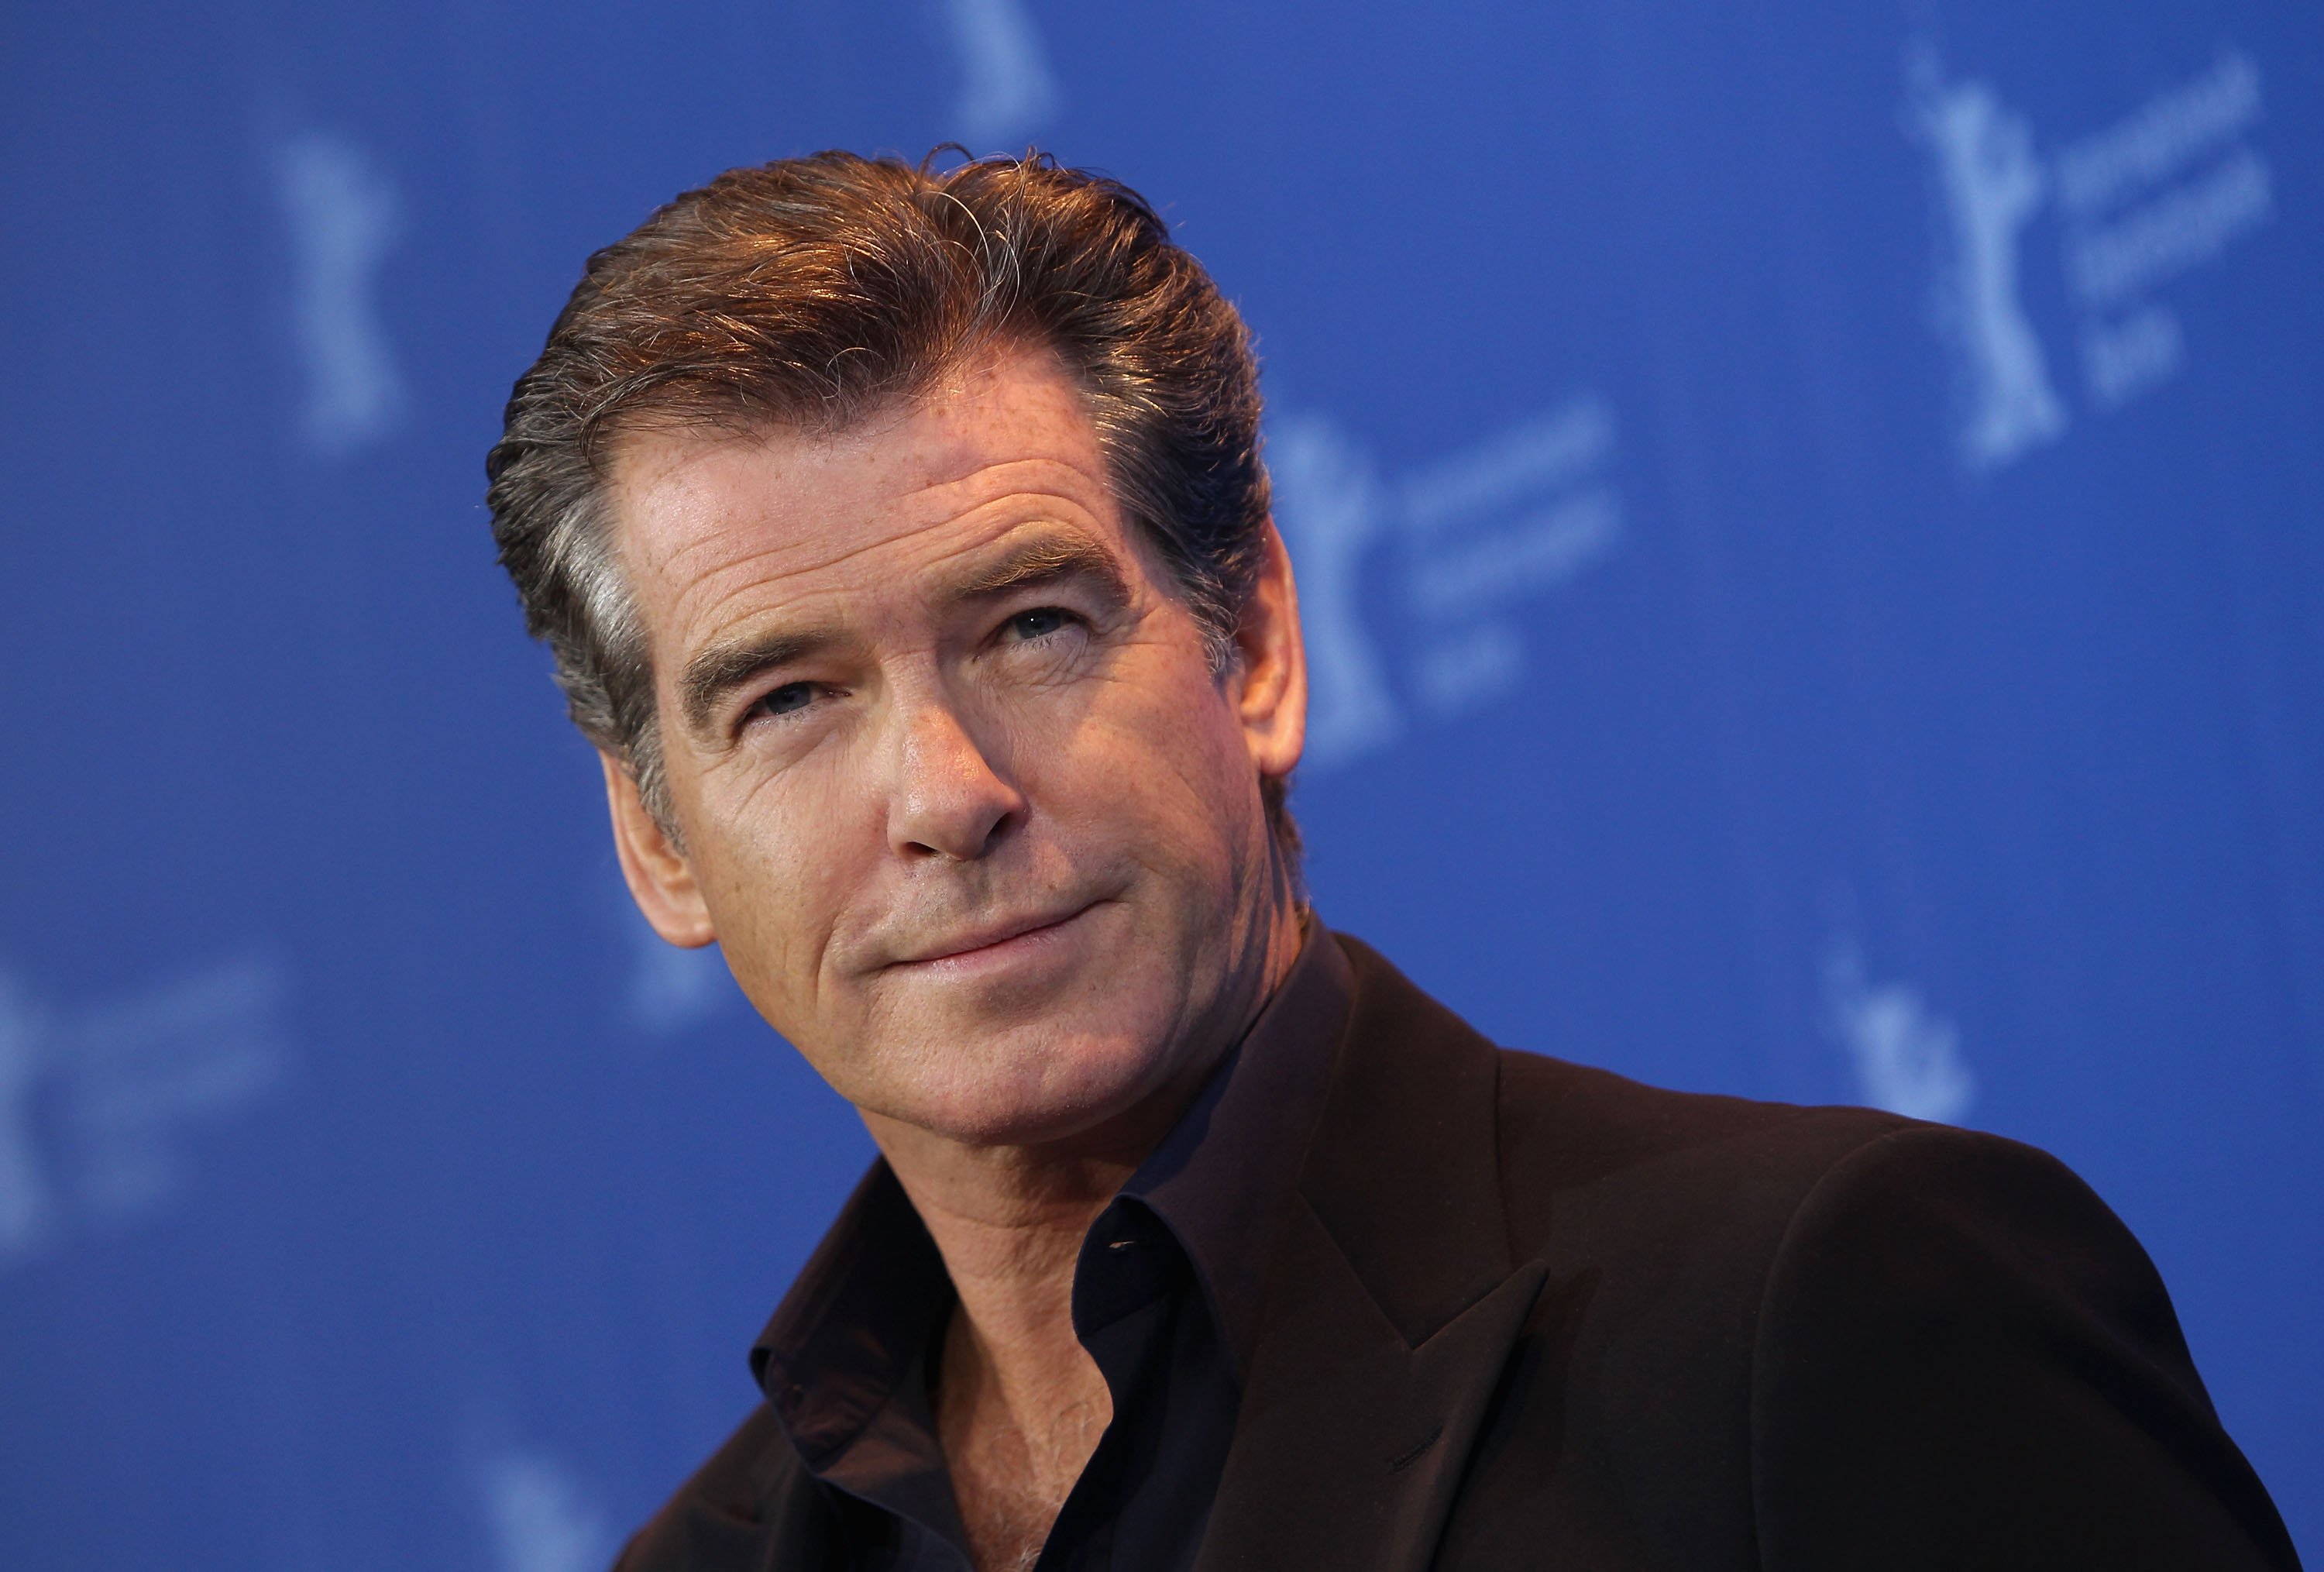 Pierce Brosnan on February 12, 2010 in Berlin, Germany | Source: Getty Images 